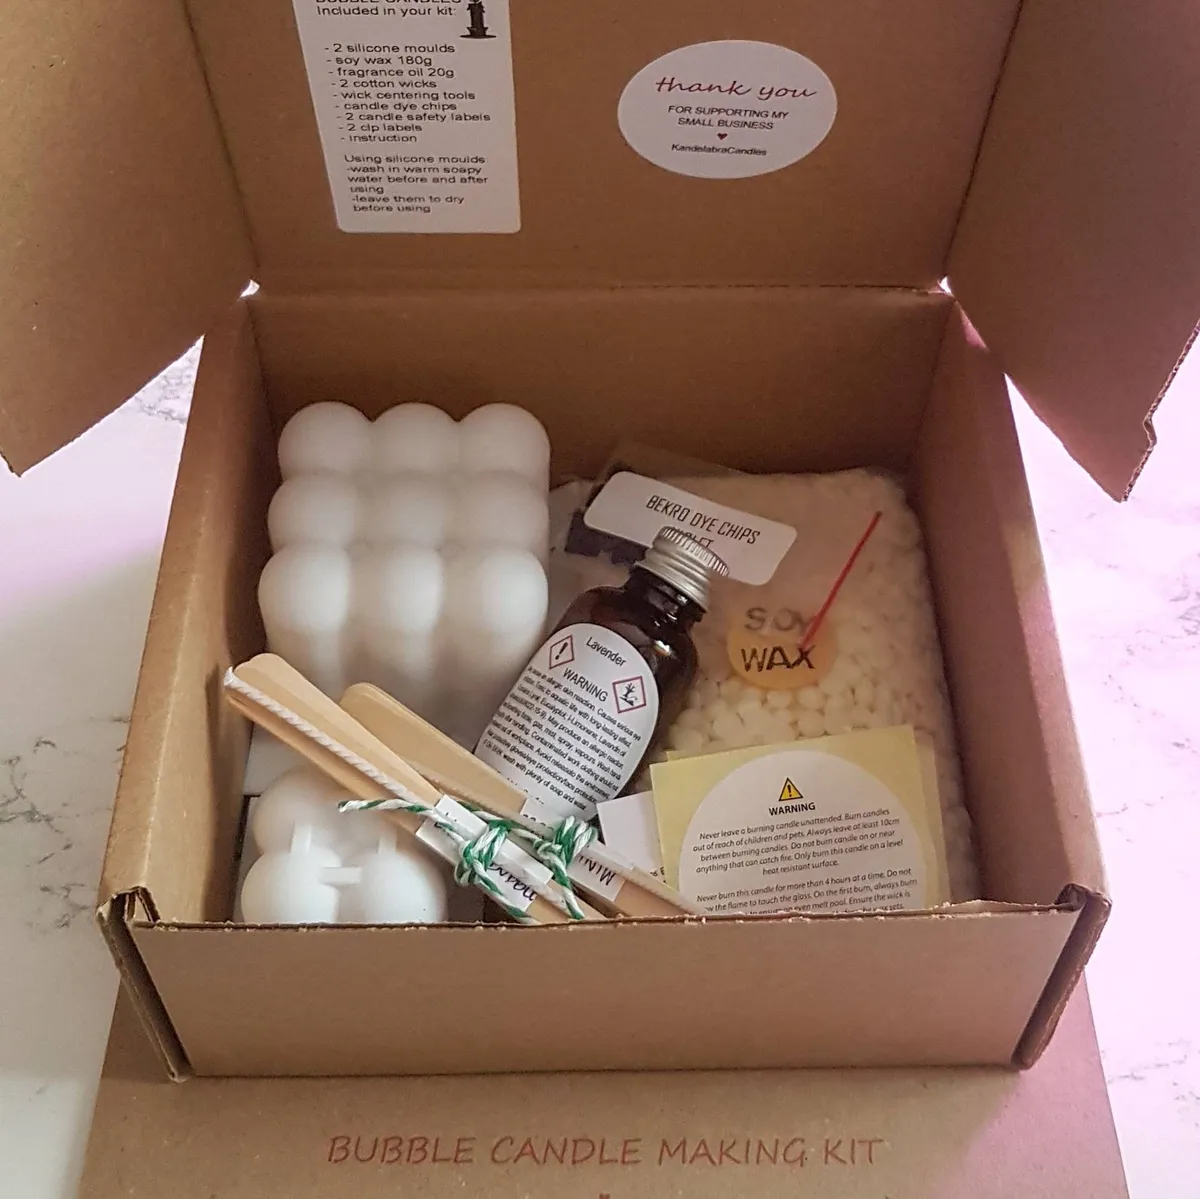 Candle Making Kit,Complete Candle Making Kits for Adults Kids,DIY Scented  Candle Making Supplies Include Soy Wax for Candle Making,Scent Oils Wicks  Dyes Candle Jars Melting Pot,Arts and Crafts Kits 